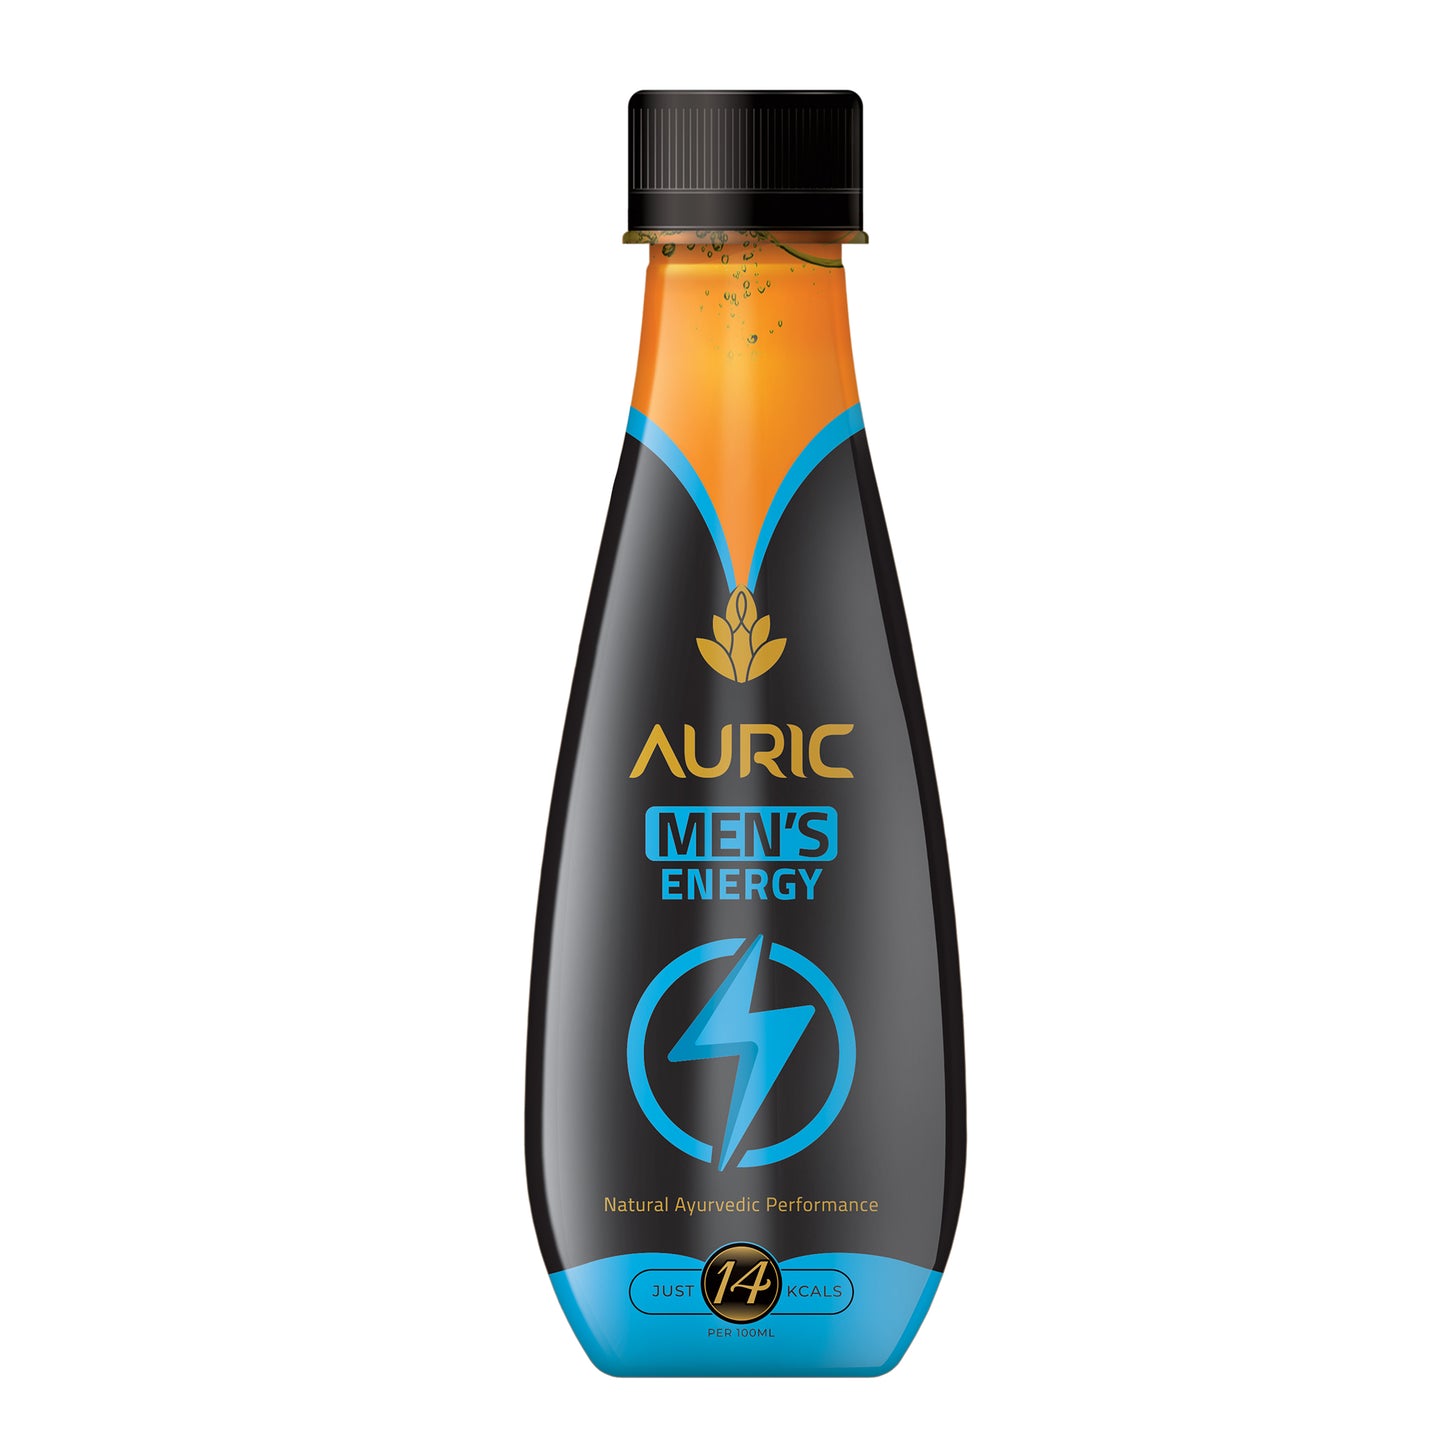 Auric Men's Energy Drink in Coconut Water for Stamina Pack of 24 Bottles